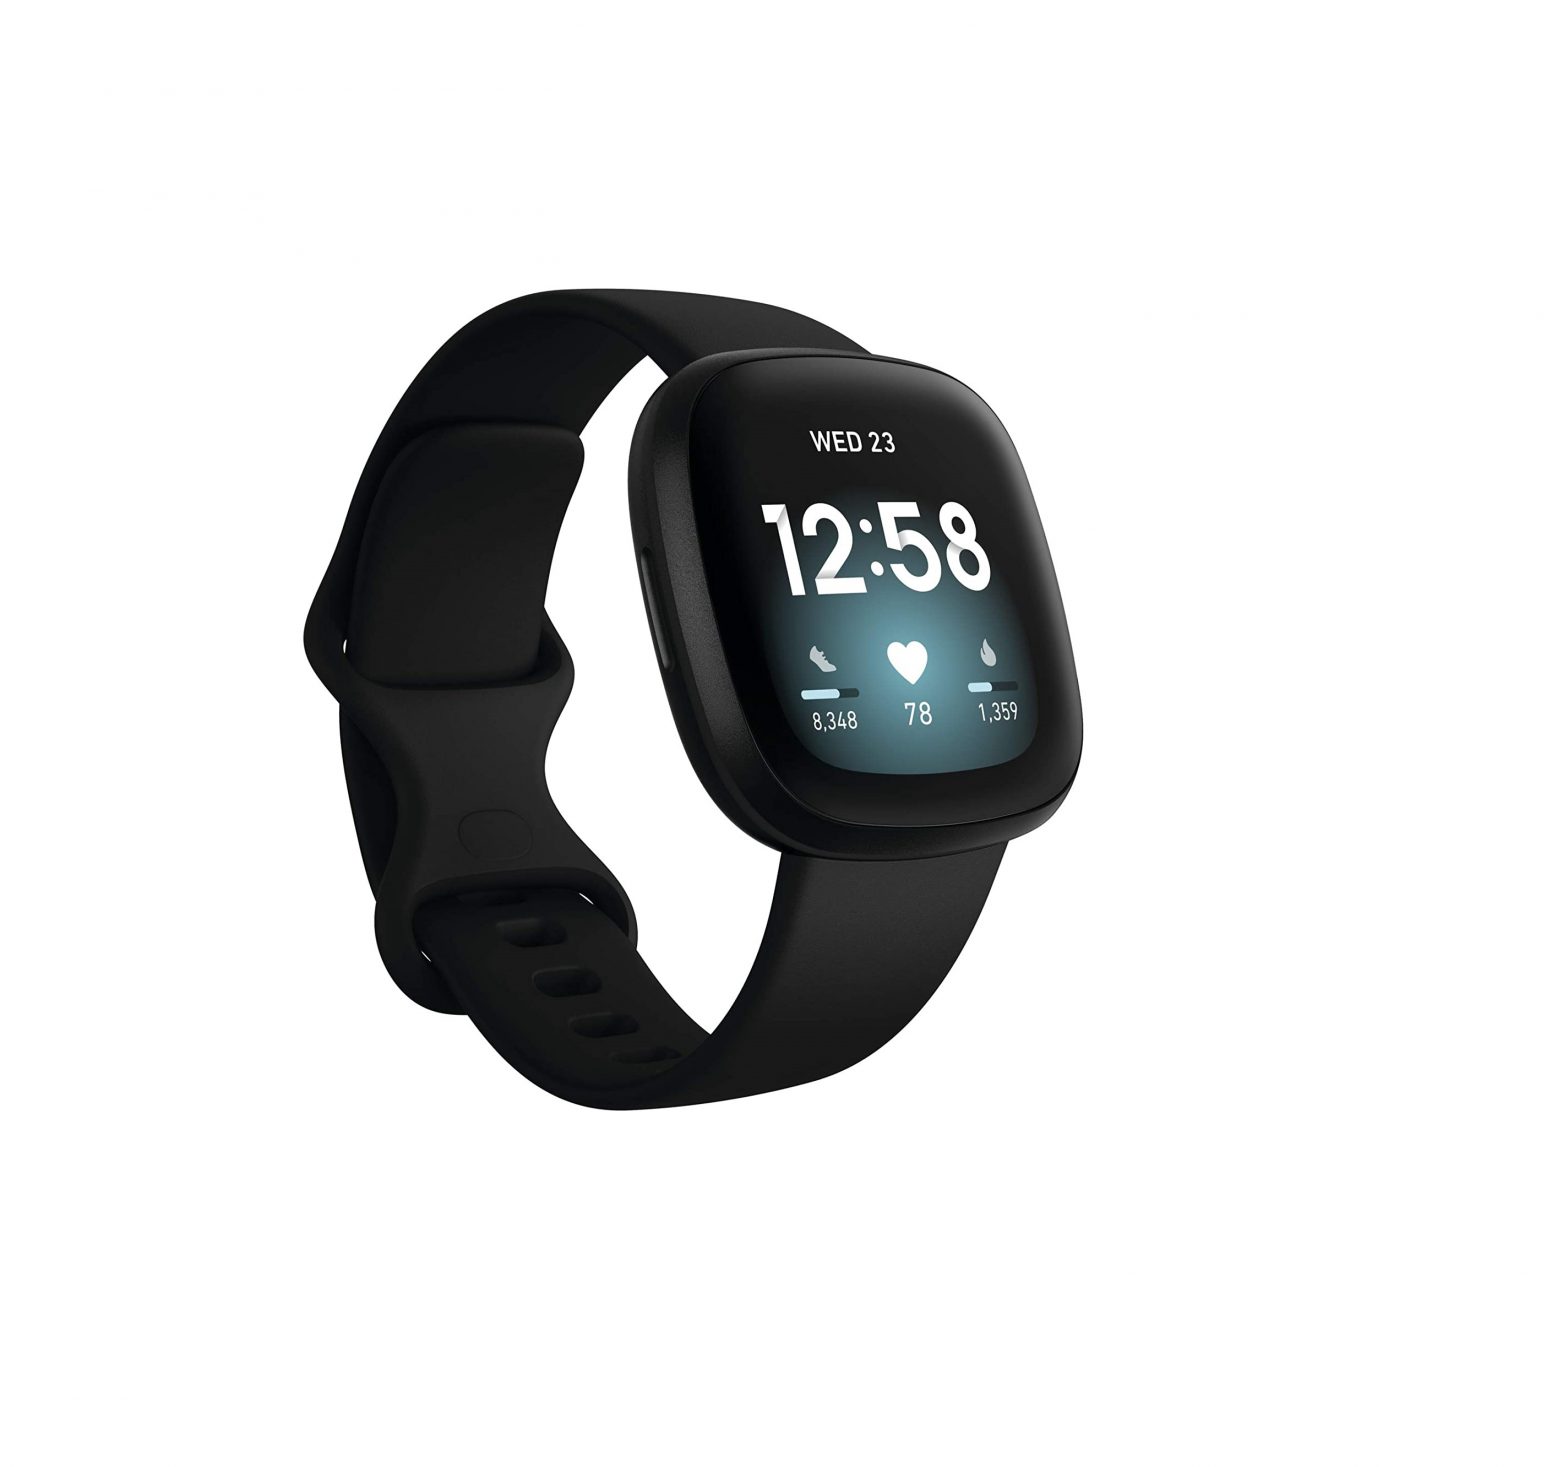 Fitbit Versa 3 Health & Fitness Smartwatch Specifications